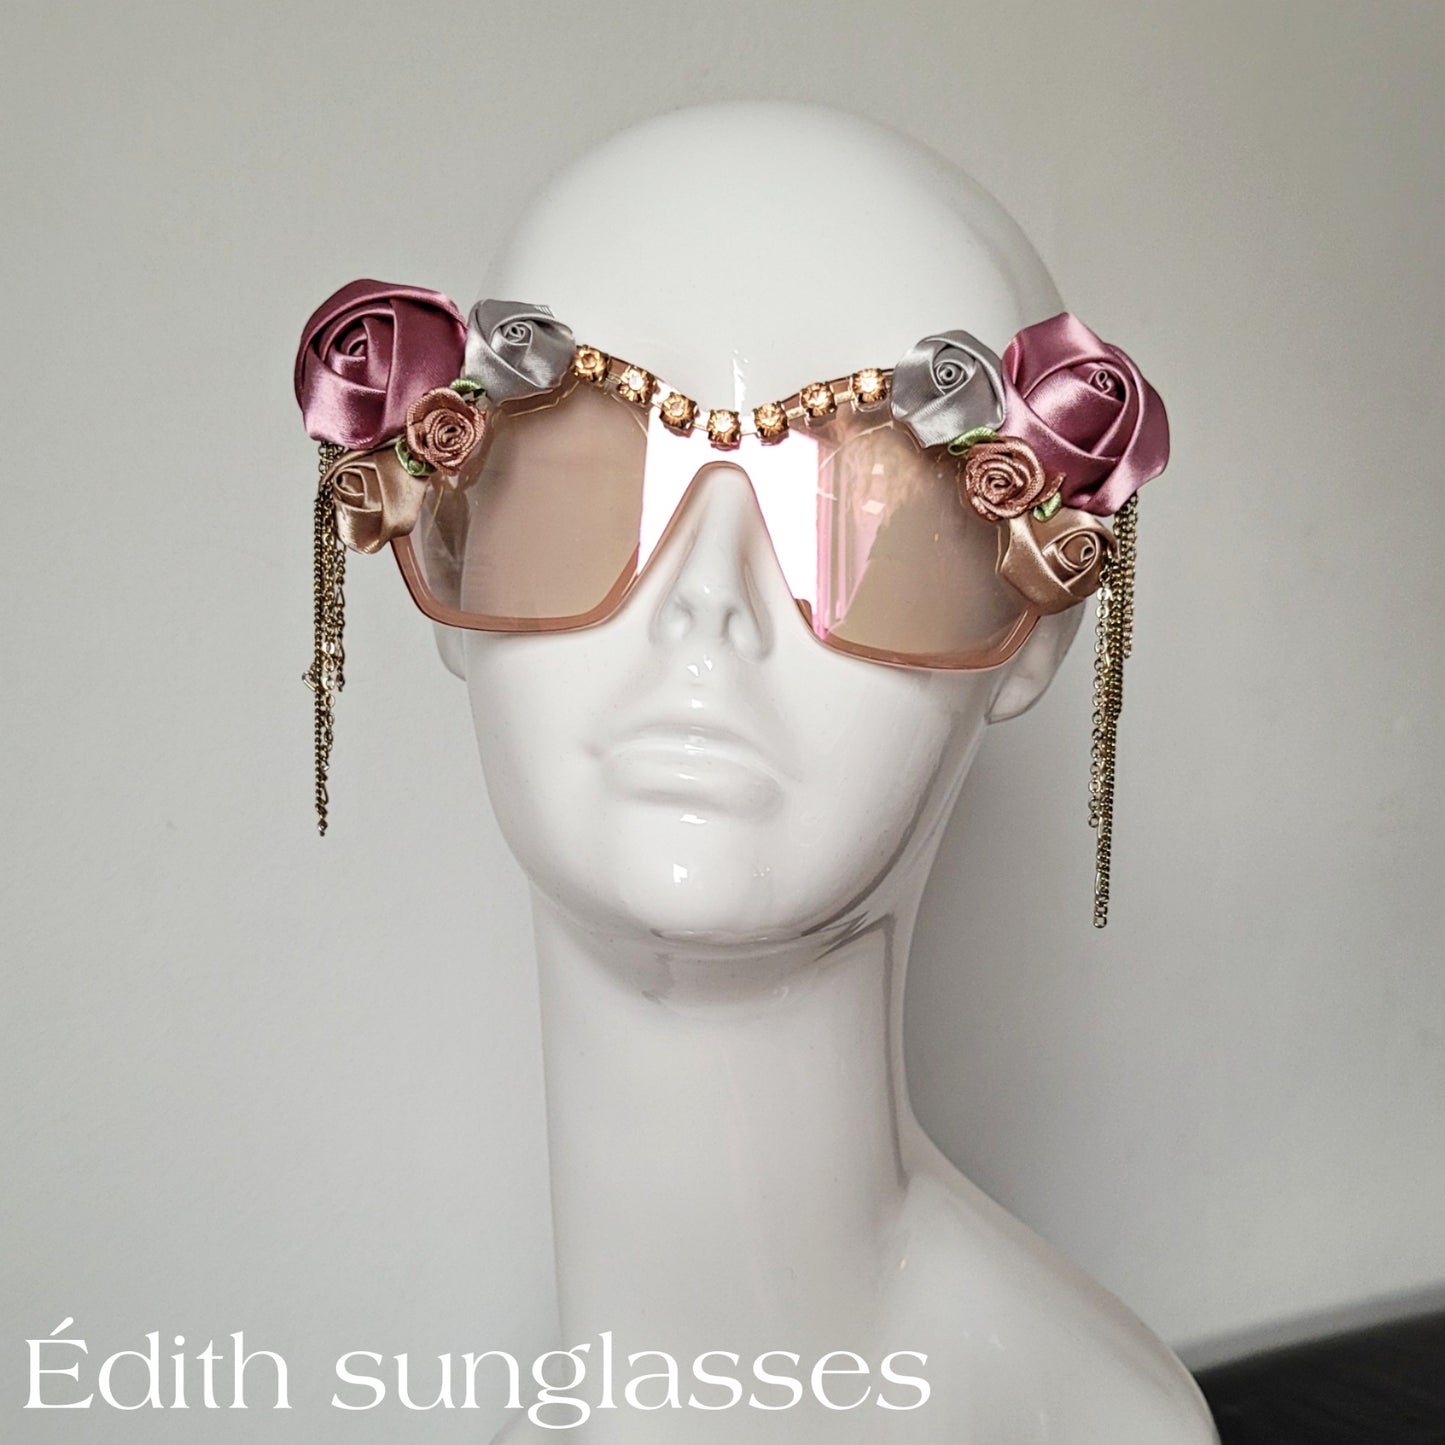 Á vallians coeurs riens impossible Collection: The Édith sunglasses